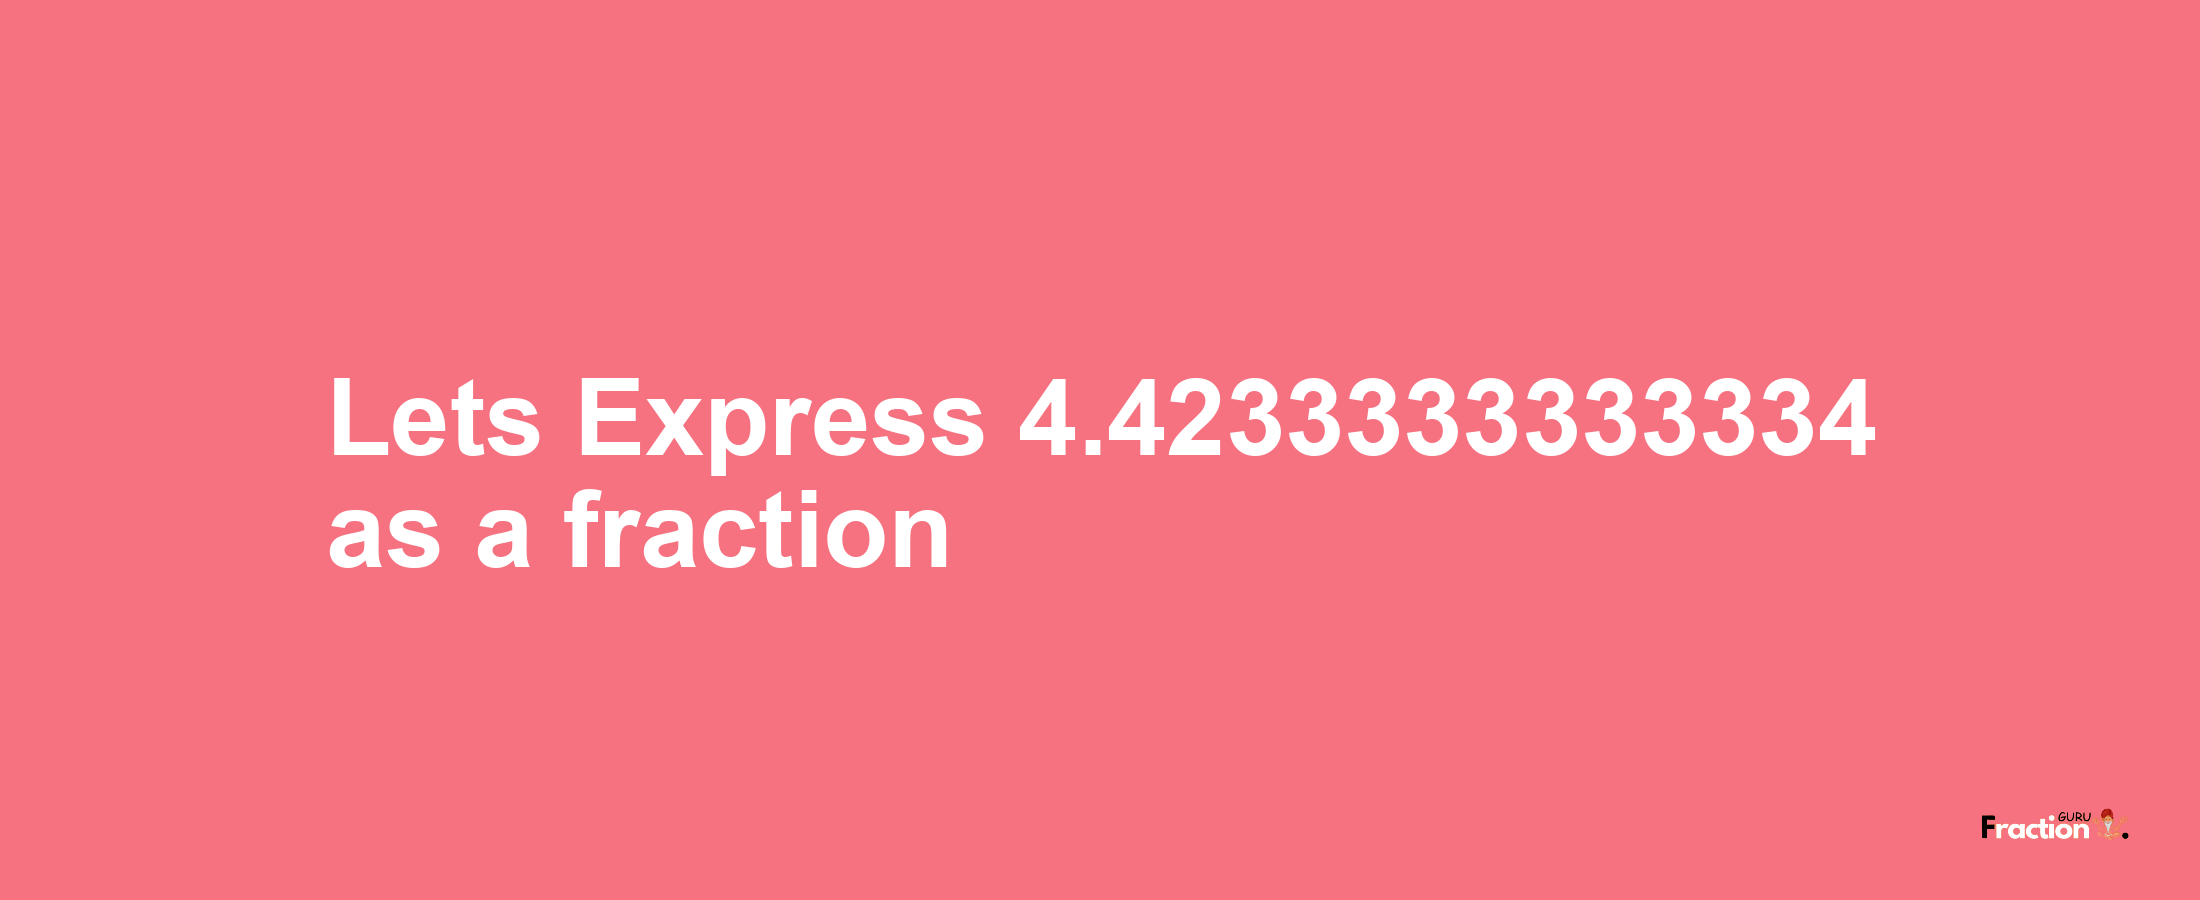 Lets Express 4.4233333333334 as afraction